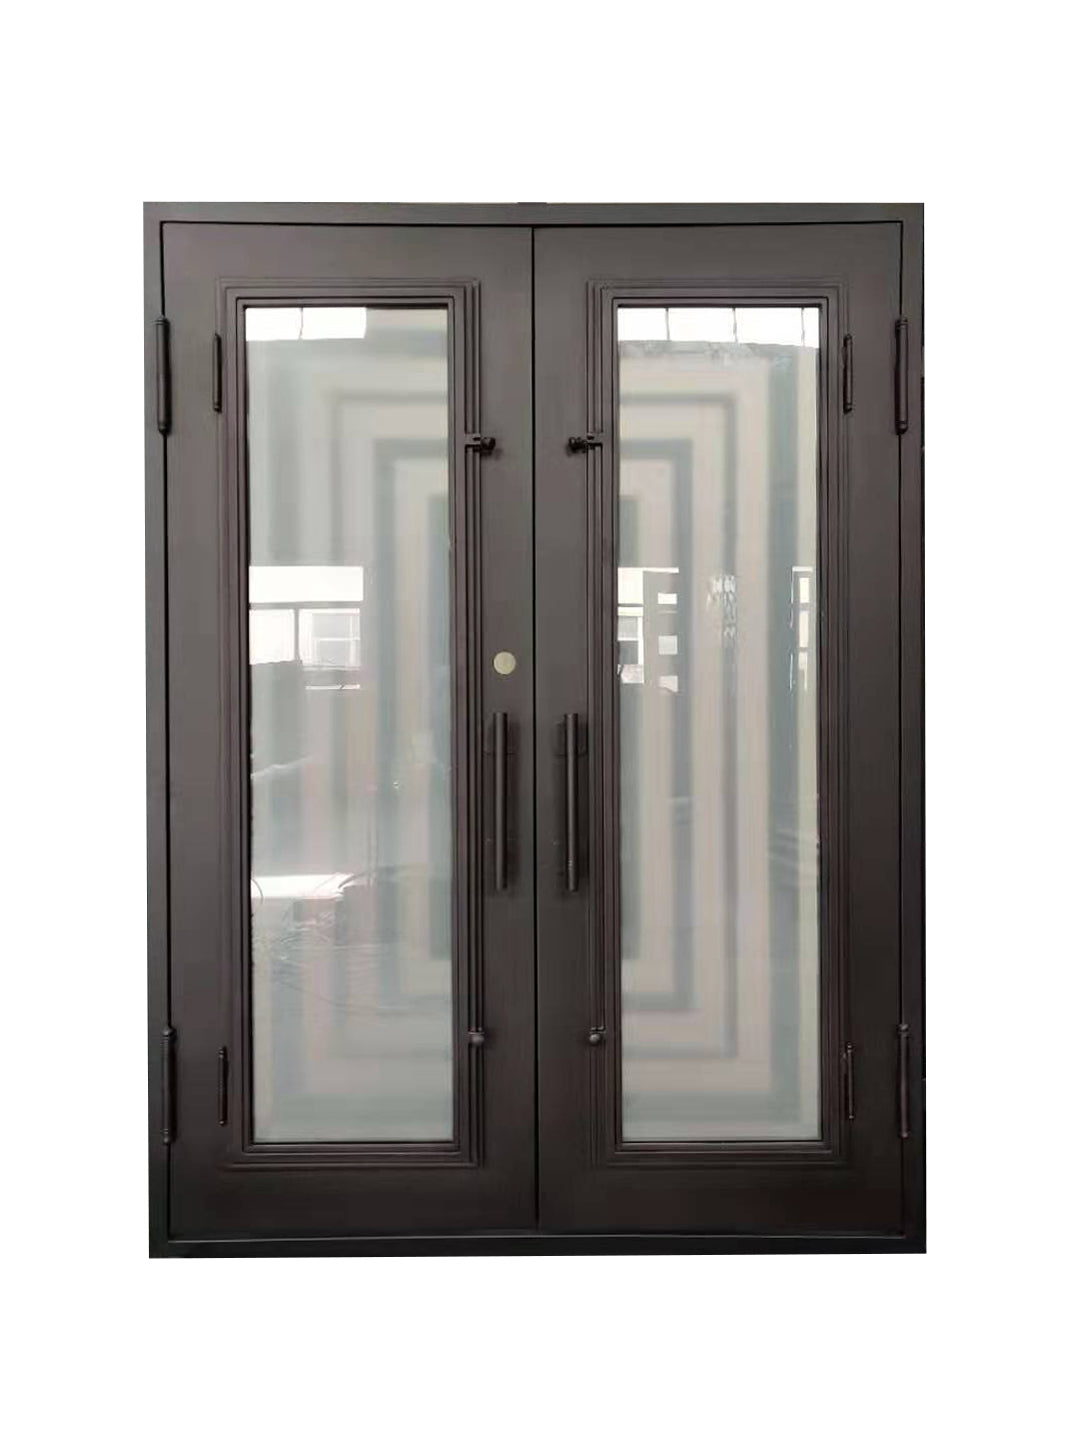 Bellaire Model Double Front Entry Iron Door With Tempered Frosted Glass - AAWAIZ IMPORTS